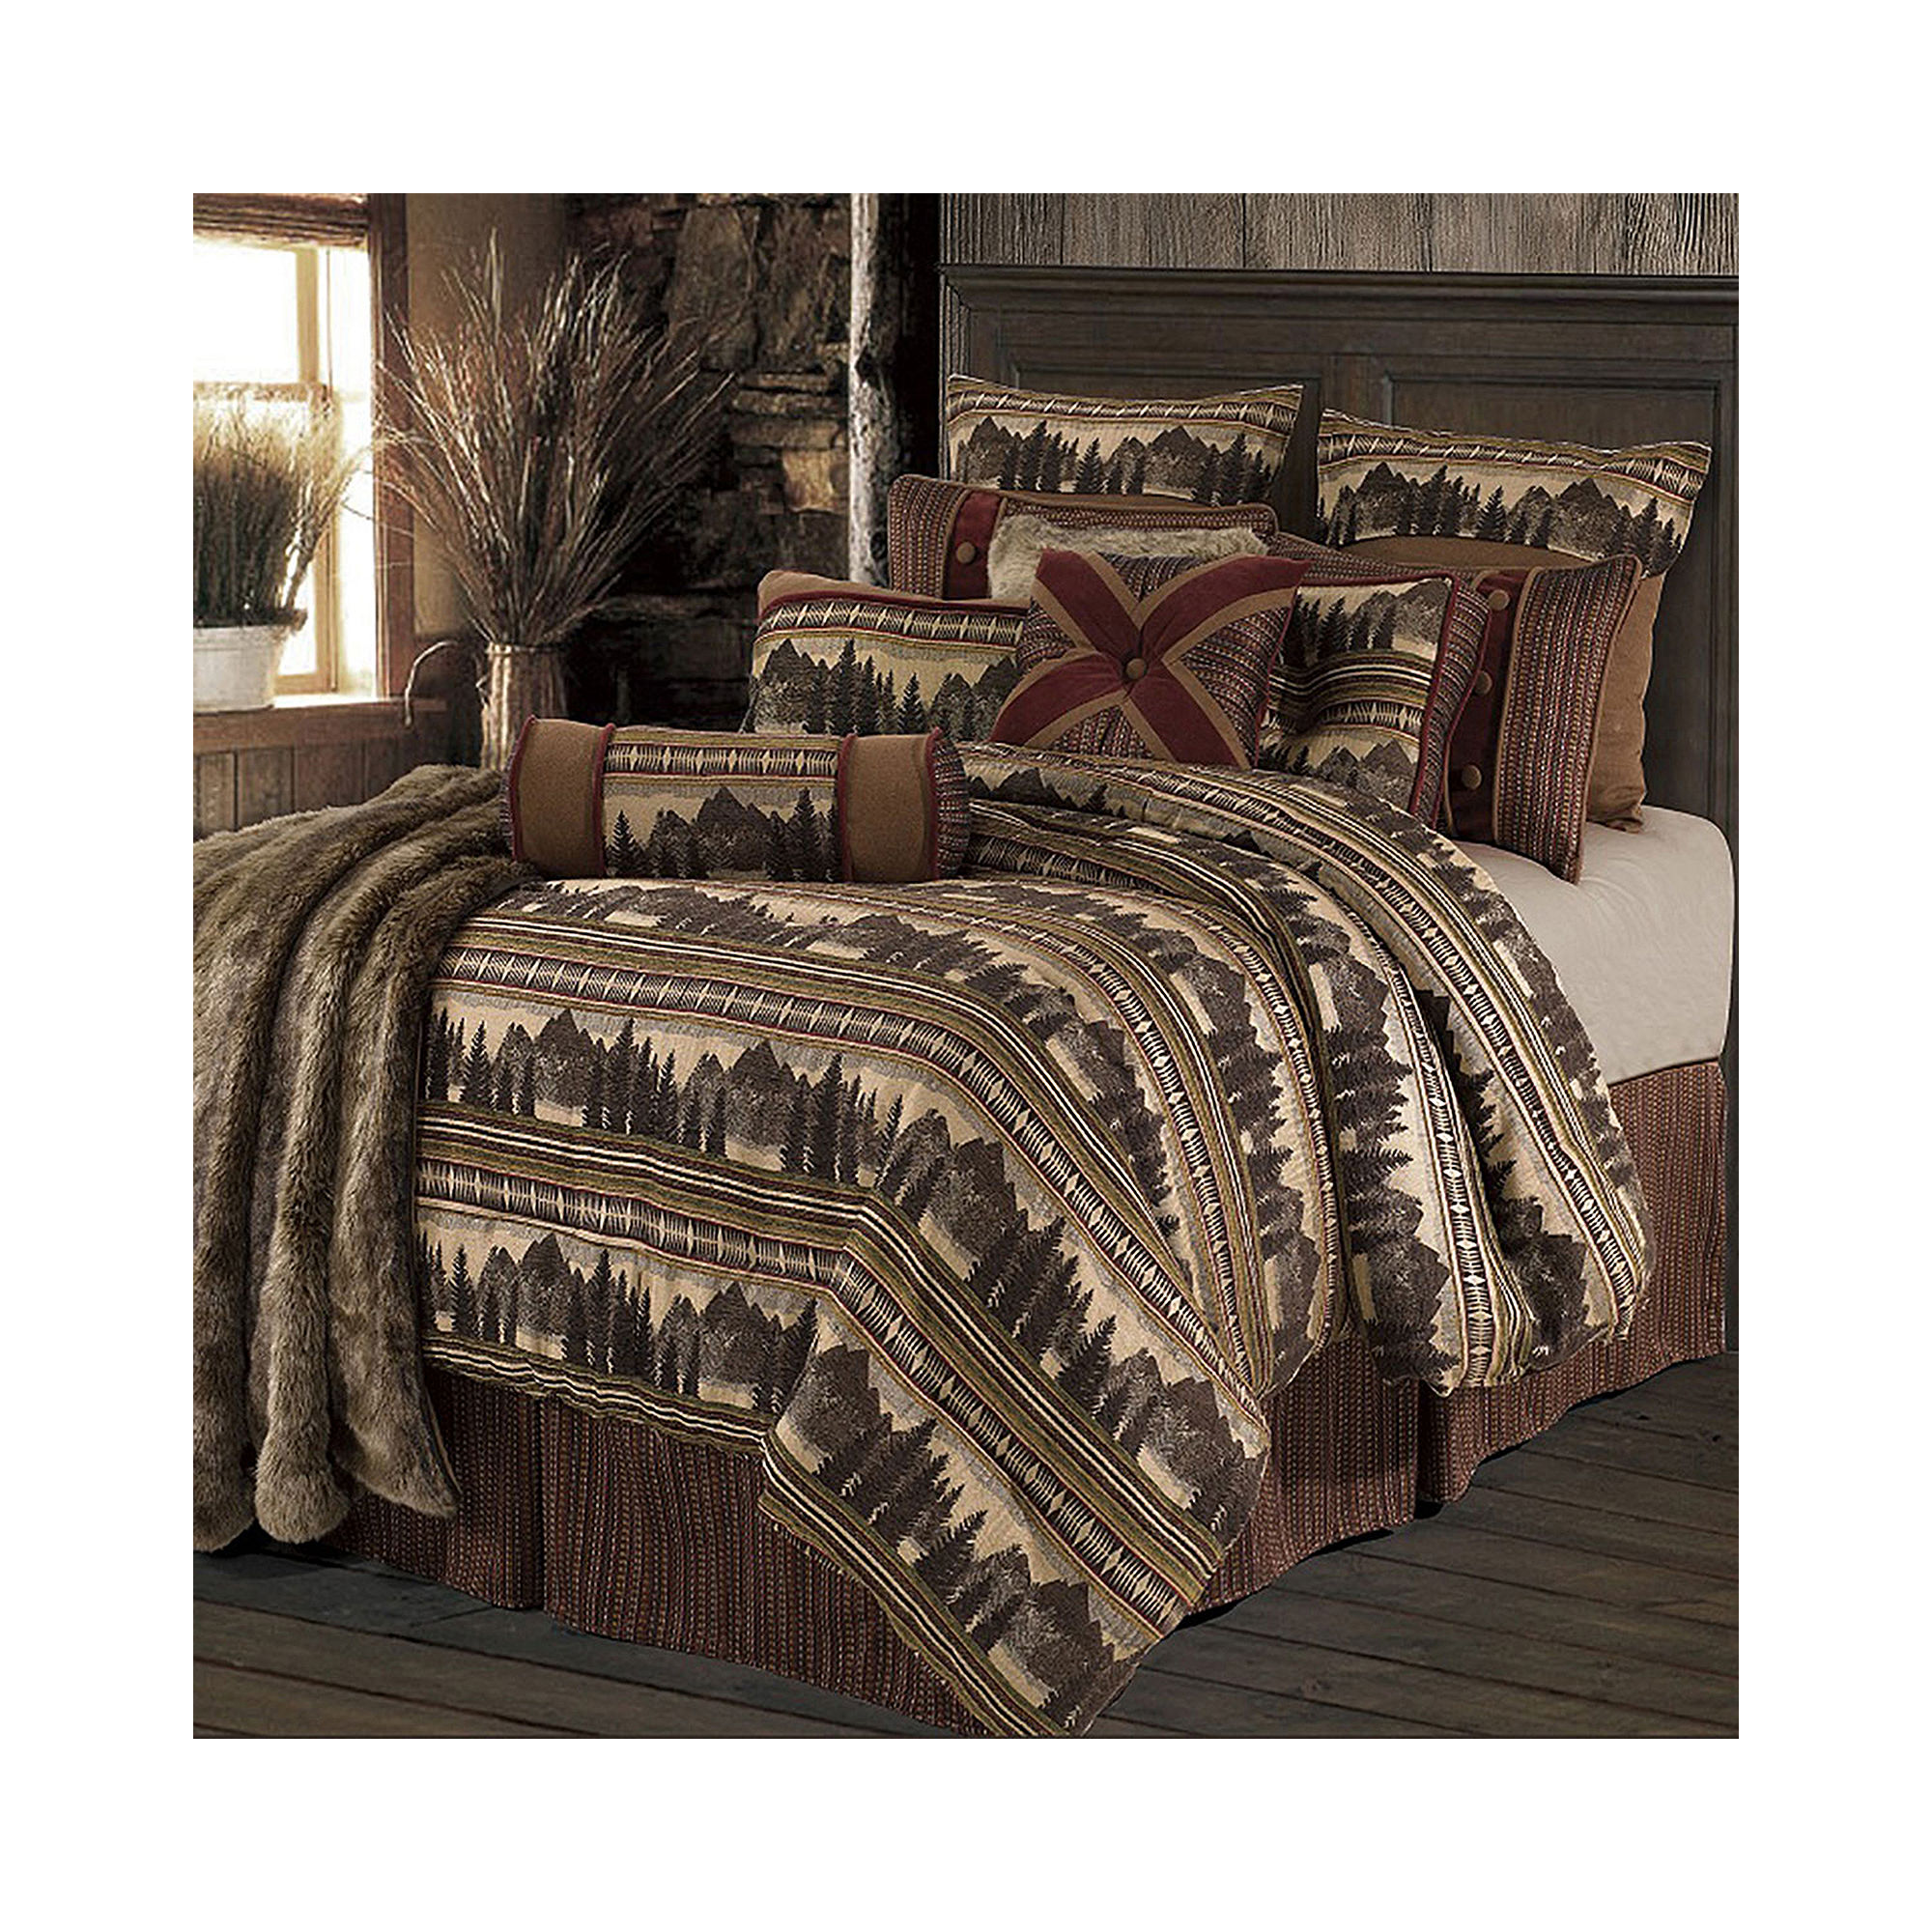 HiEnd Accents Briarcliff Comforter Set